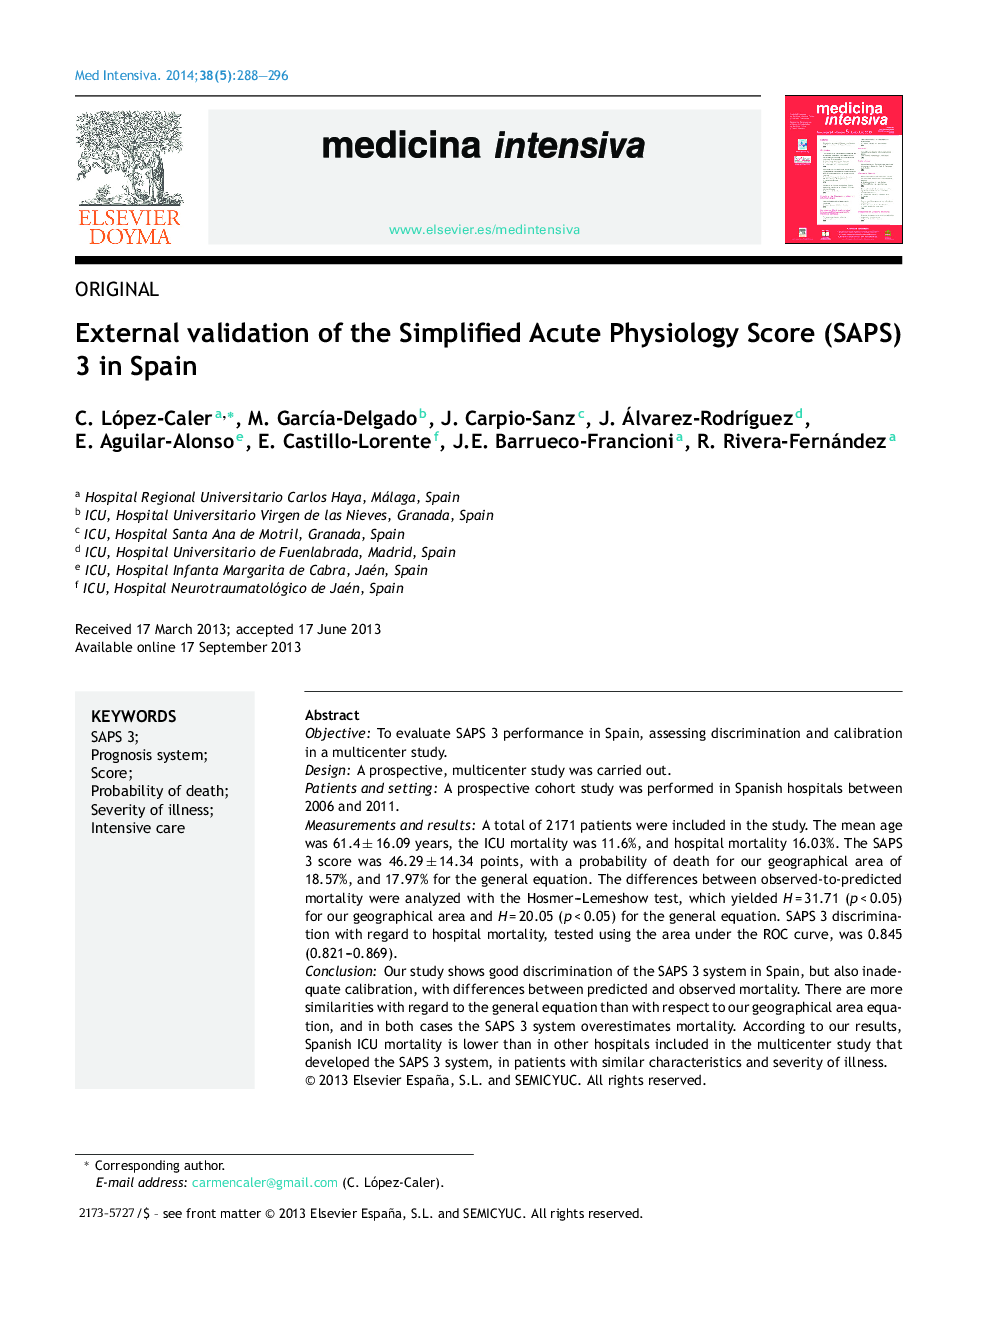 External validation of the Simplified Acute Physiology Score (SAPS) 3 in Spain